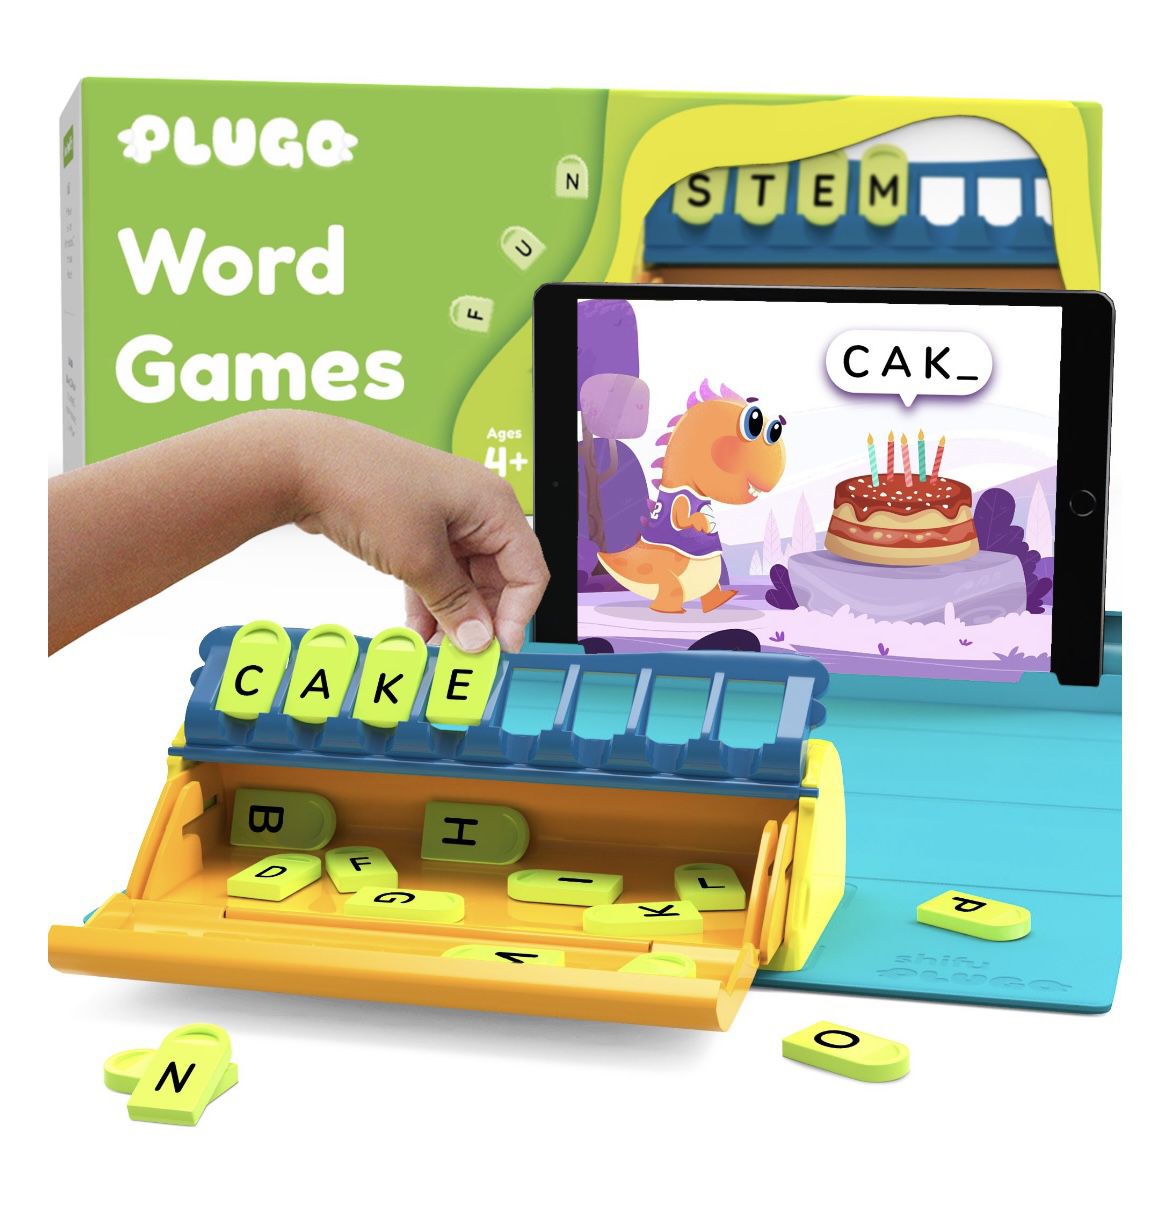 PlayShifu Educational Word Game - Plugo Letters (Kit + App with 9 Learning Games) STEM Toy Gifts for Kids Age 4+ Phonics, Spellings & Grammar 